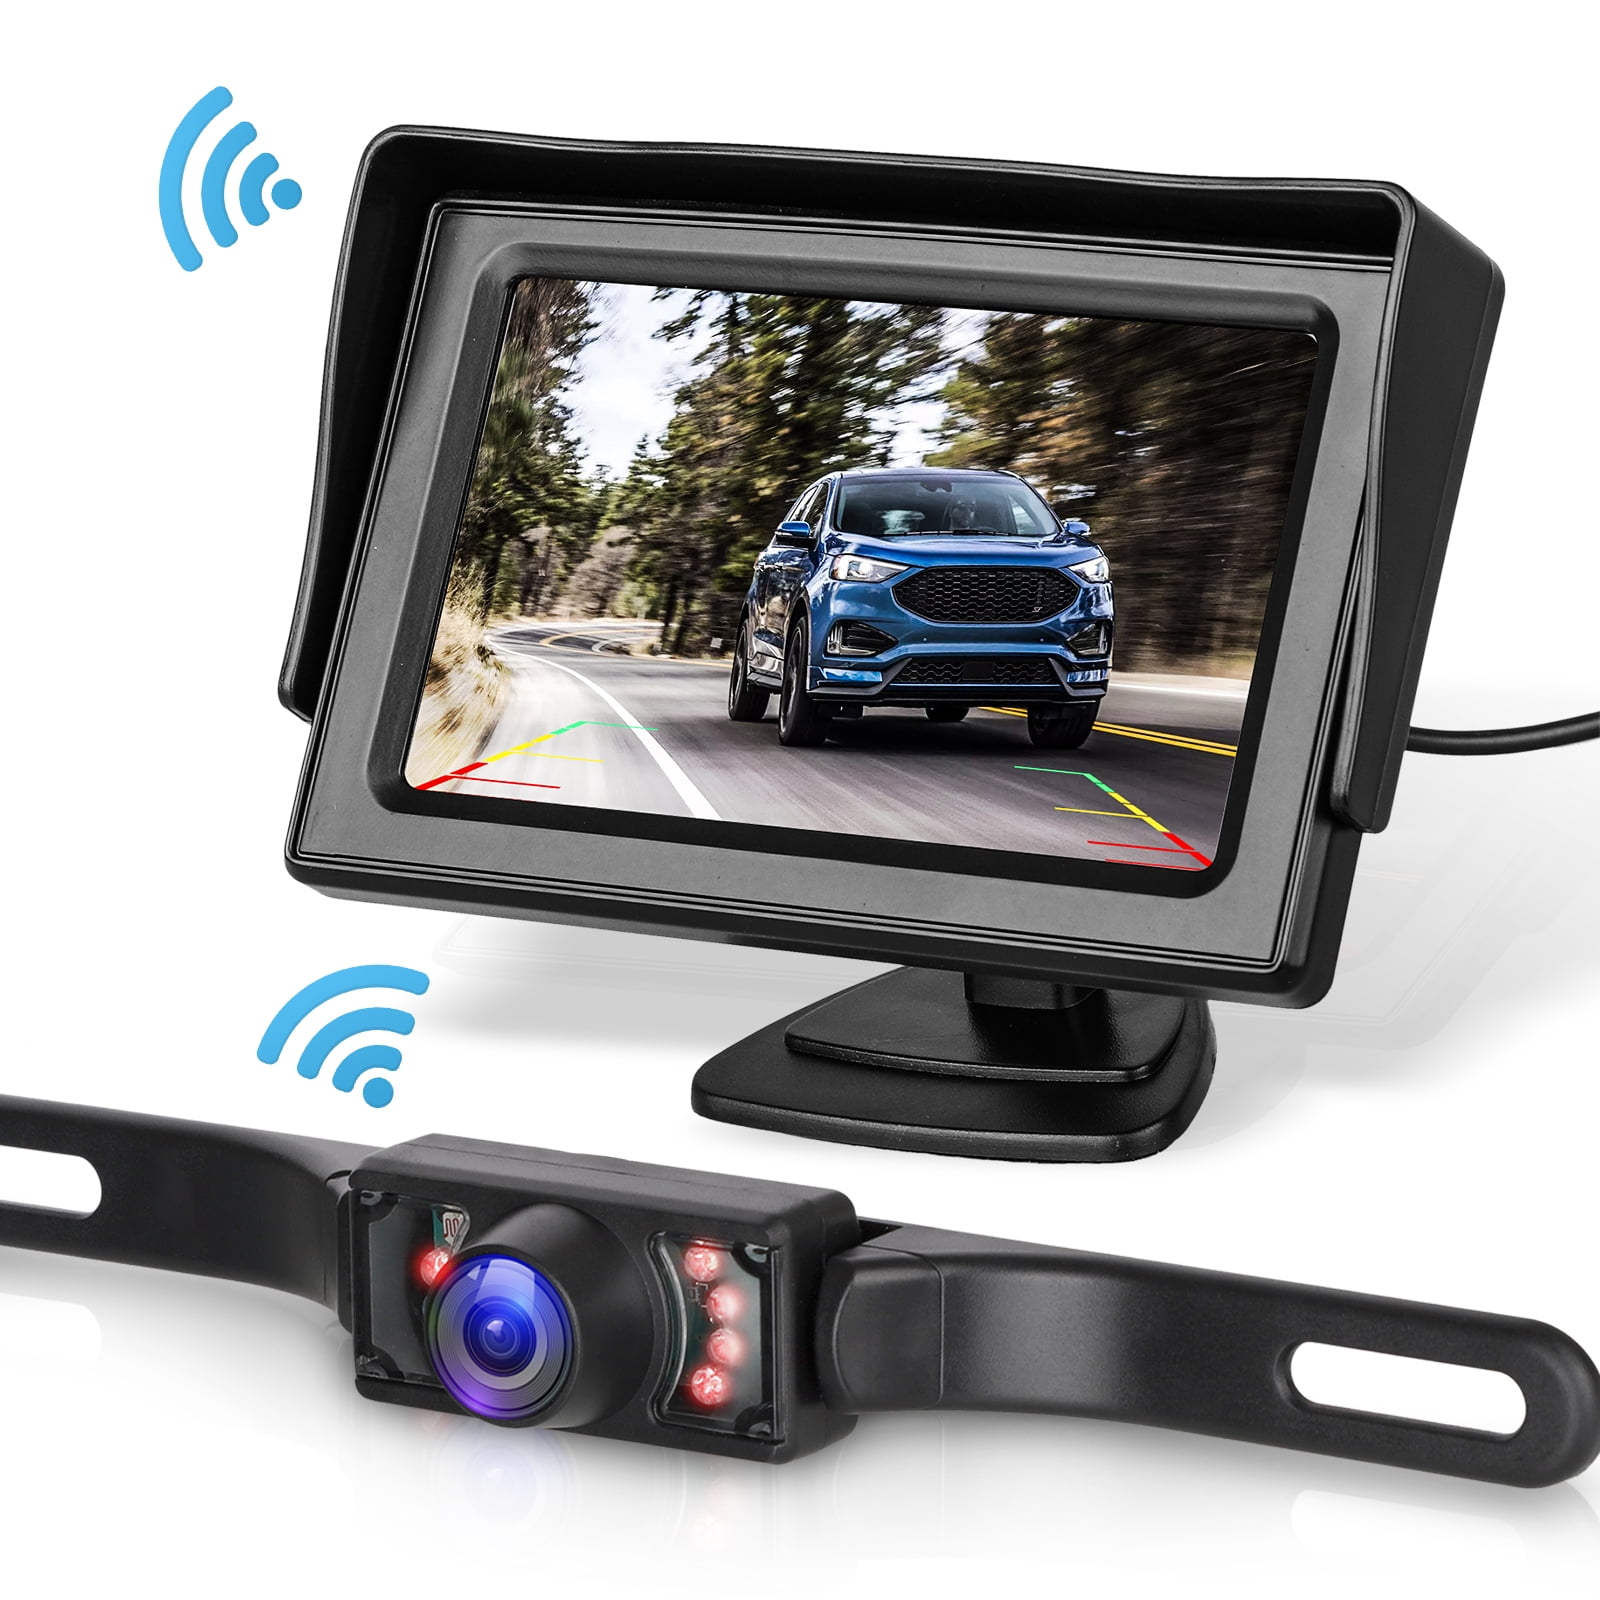 Pickups SUV OBEST 4.3 Wireless Backup Camera and Monitor Kit丨Waterproof Night Vision Front/Rear View Camera with Grid Line丨Easy Installation for Cars Camping Car Trucks 